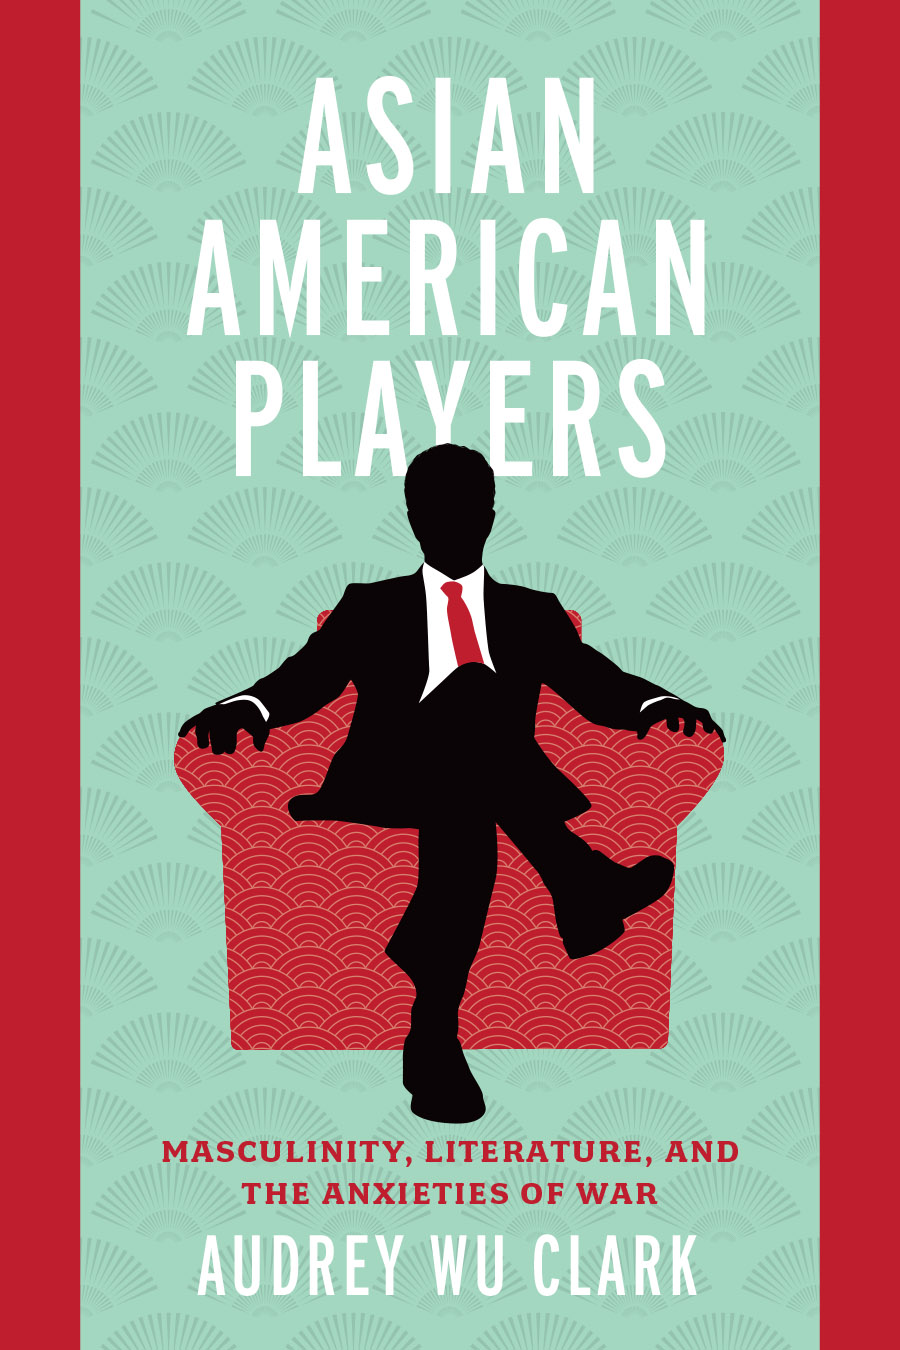 Front cover of Asian American Players: Masculinity, Literature, and the Anxieties of War by Audrey Wu Clark, featuring a silhouette of a businessman in suit and tie seated in a chair with a red and yellow fan-shaped pattern.